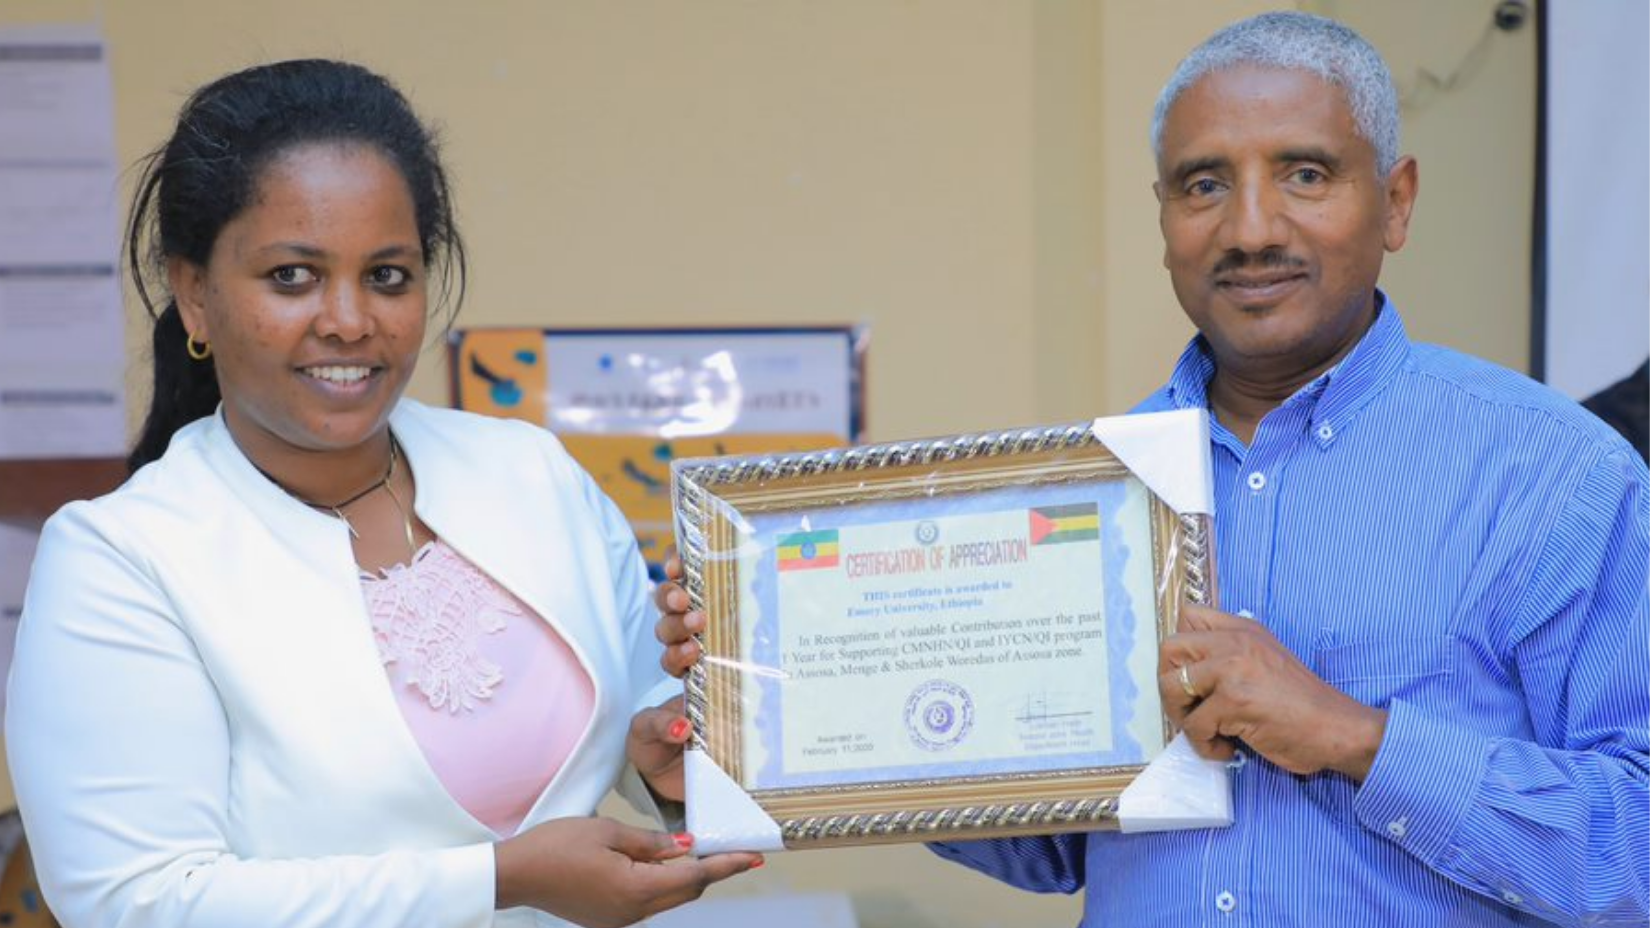 Certificate of appreciation awarded to Emory University, Ethiopia